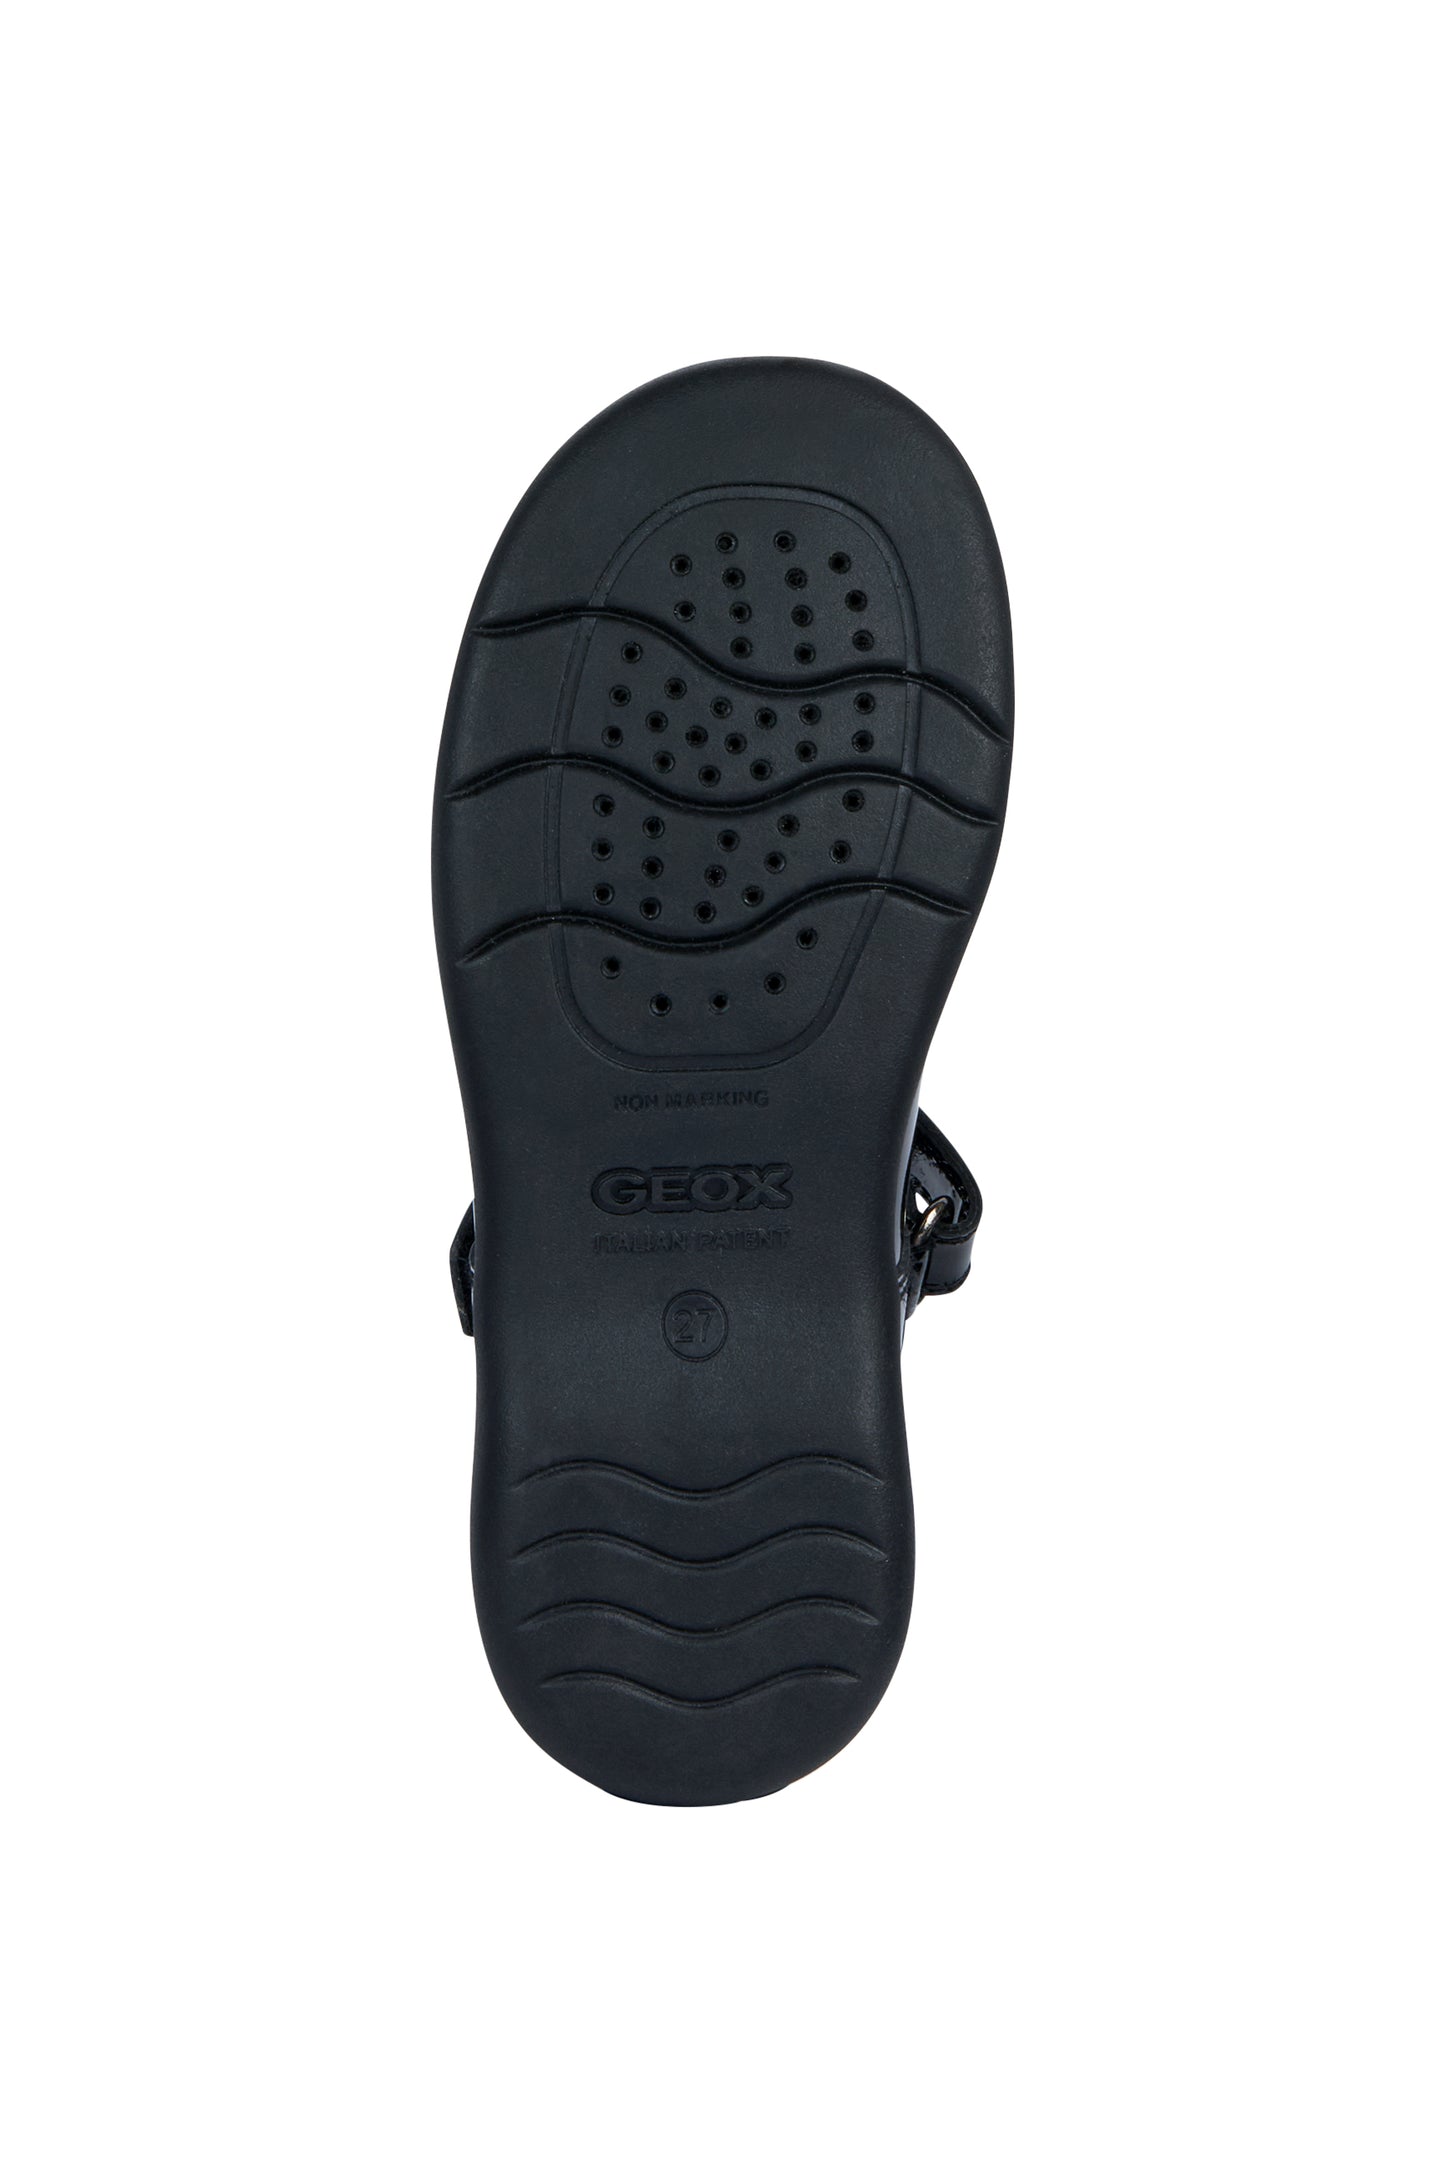 A girls school shoe by Geox, style Naimara in black patent with a velcro strap. View of sole.